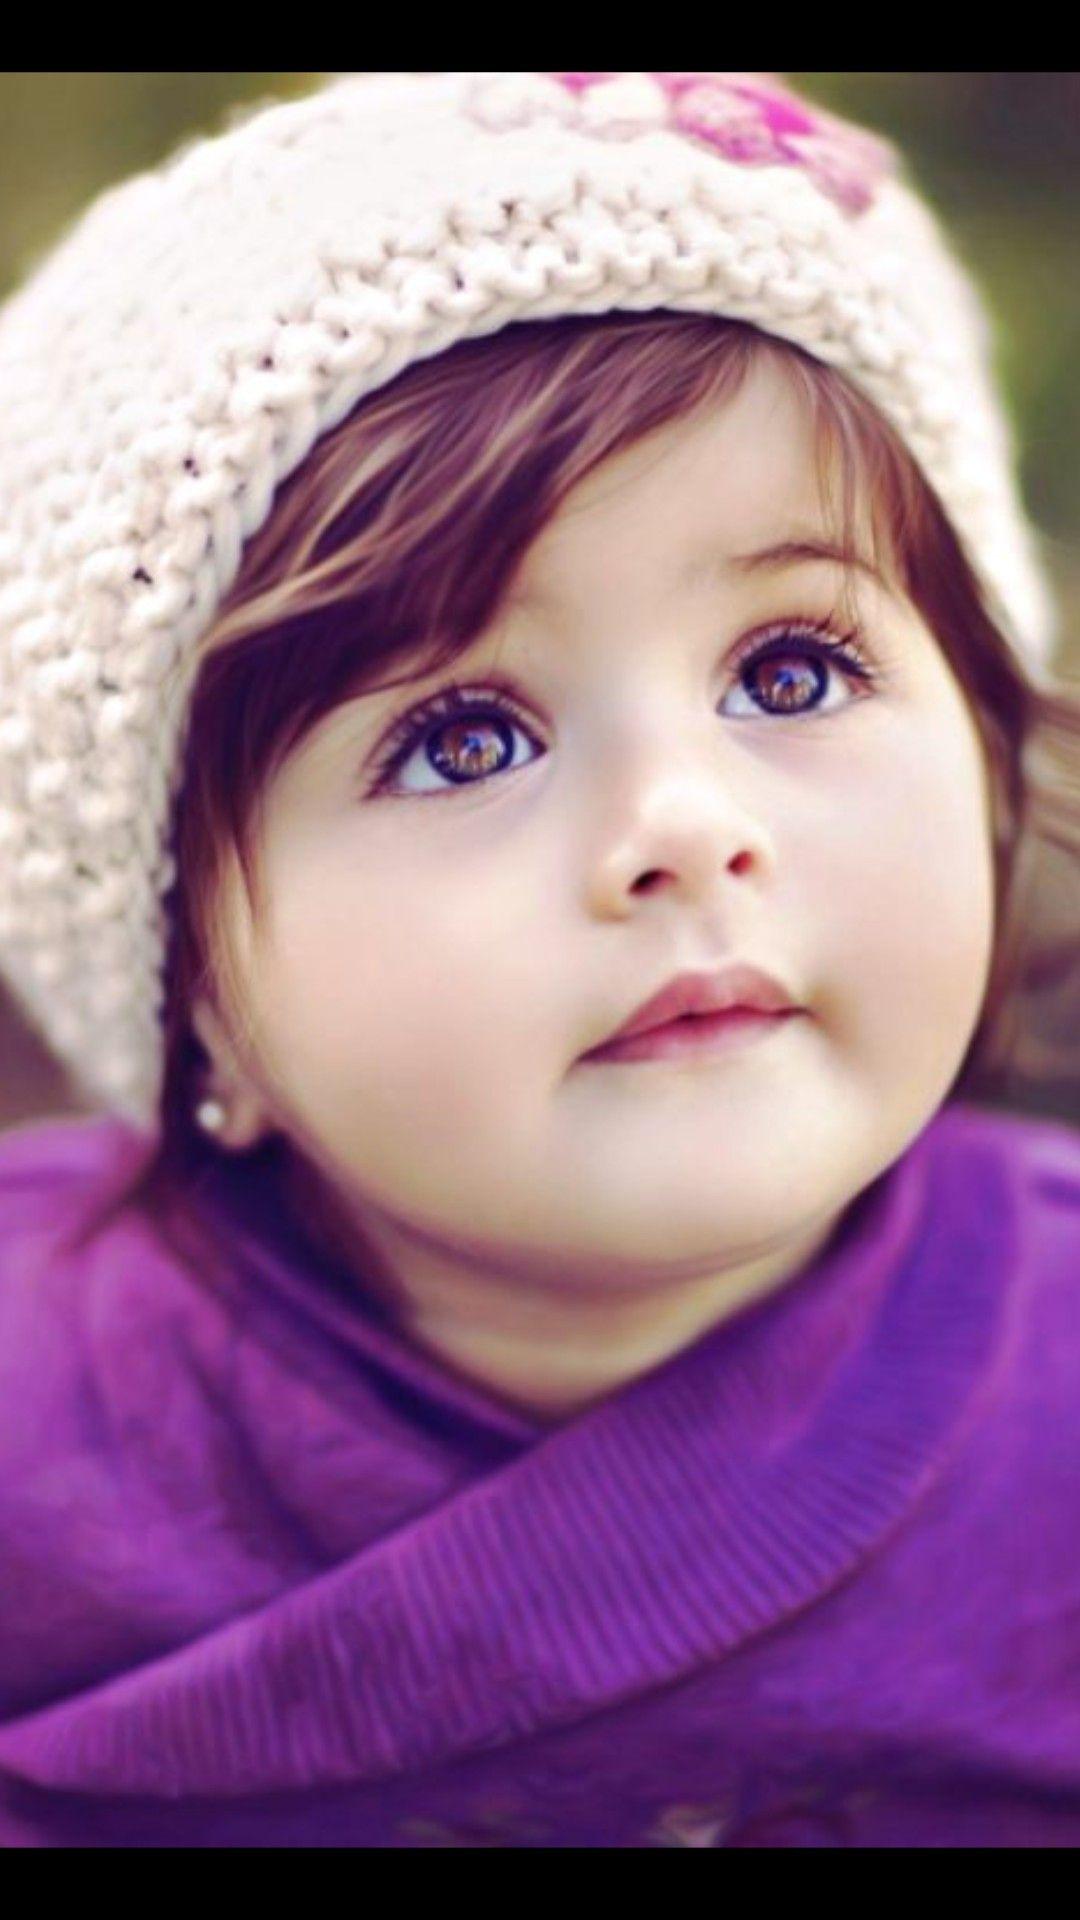 Face. Cute baby wallpaper, Baby girl image